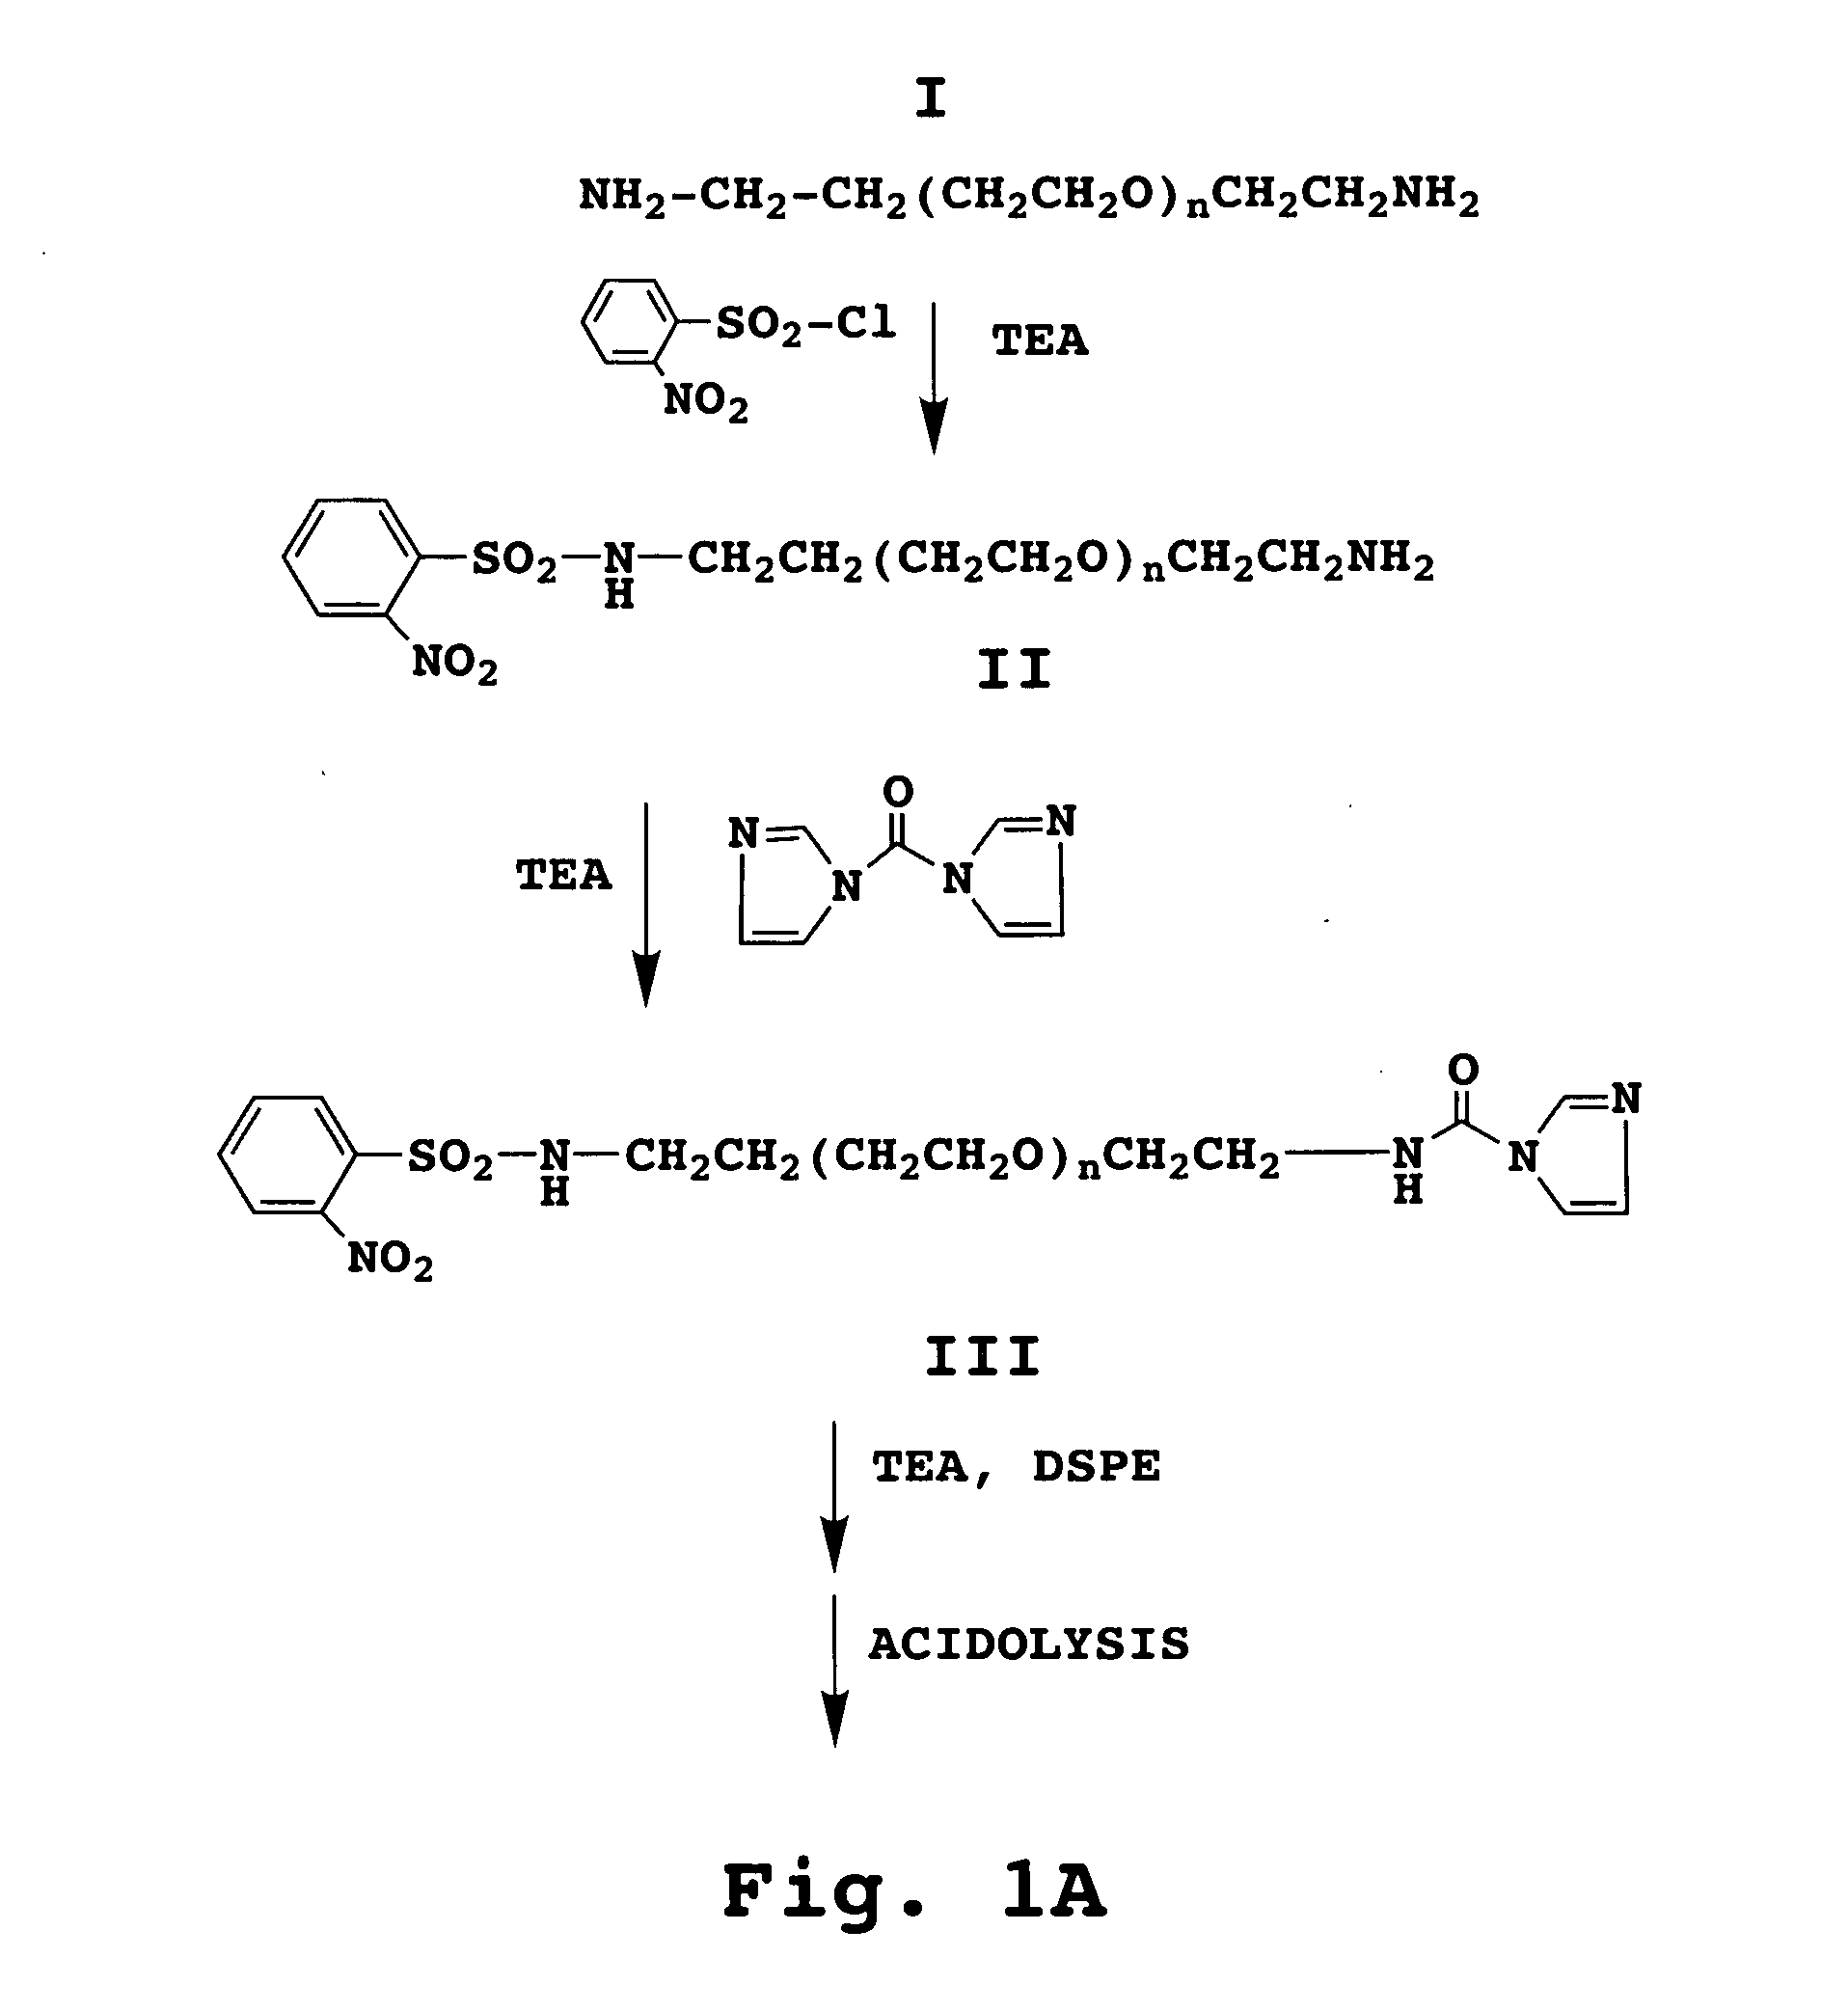 Immunoliposome composition for targeting to a HER2 cell receptor